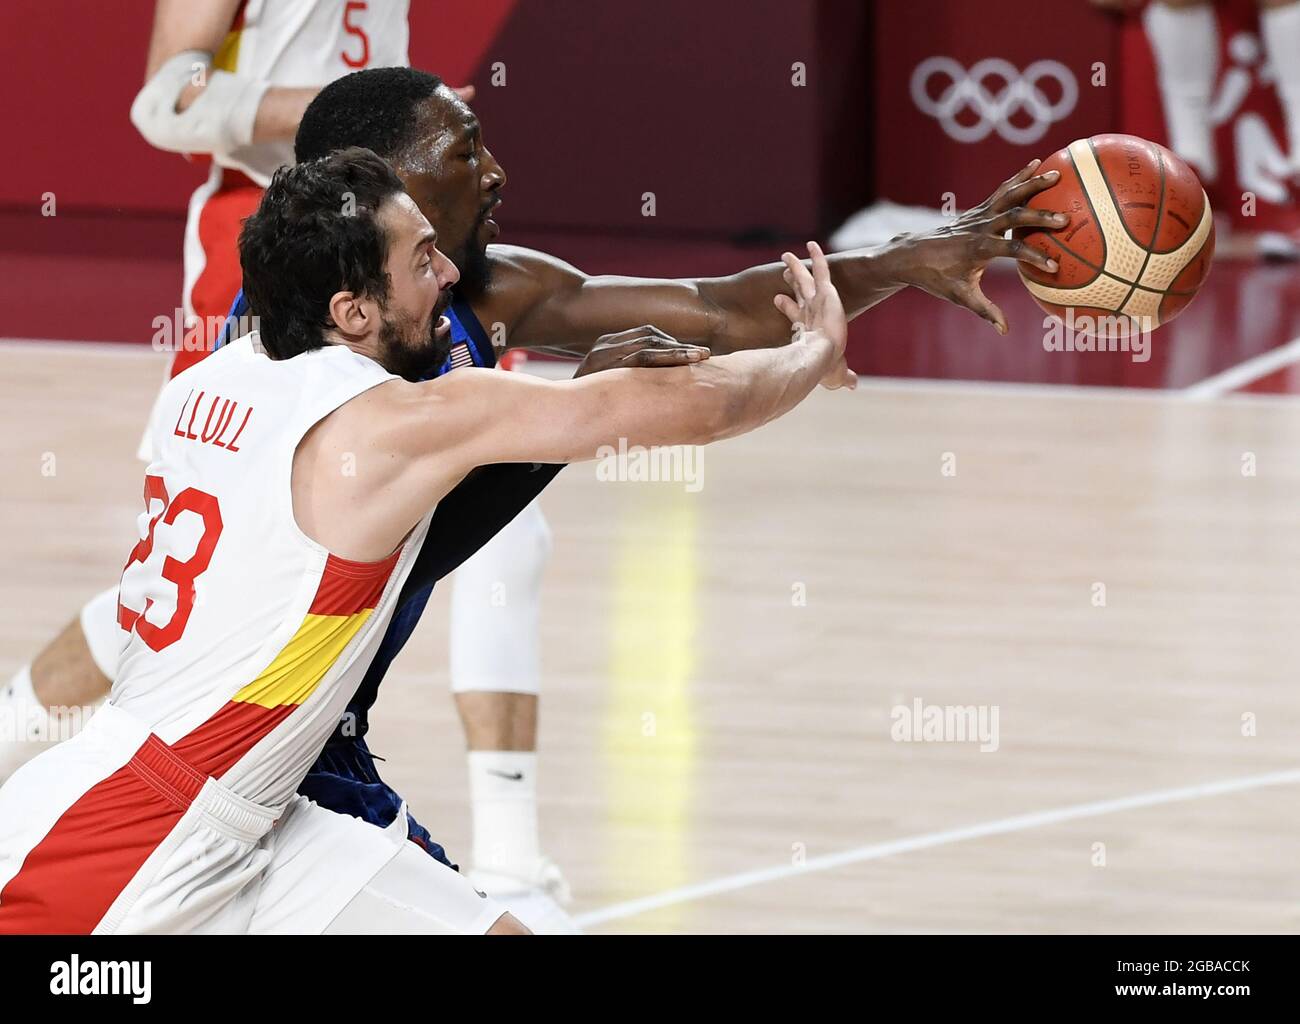 Tokyo, Japan. 03rd Aug, 2021. Spain's Sergio Llull (L) battles for the ball with United States' Bam Adebayo during Men's Basketball quarterfinal game at the Tokyo 2020 Olympics, Tuesday, August 3, 2021, in Tokyo, Japan. USA won, 95-81 to advance to the semi-finals. Photo by Mike Theiler/UPI Credit: UPI/Alamy Live News Stock Photo